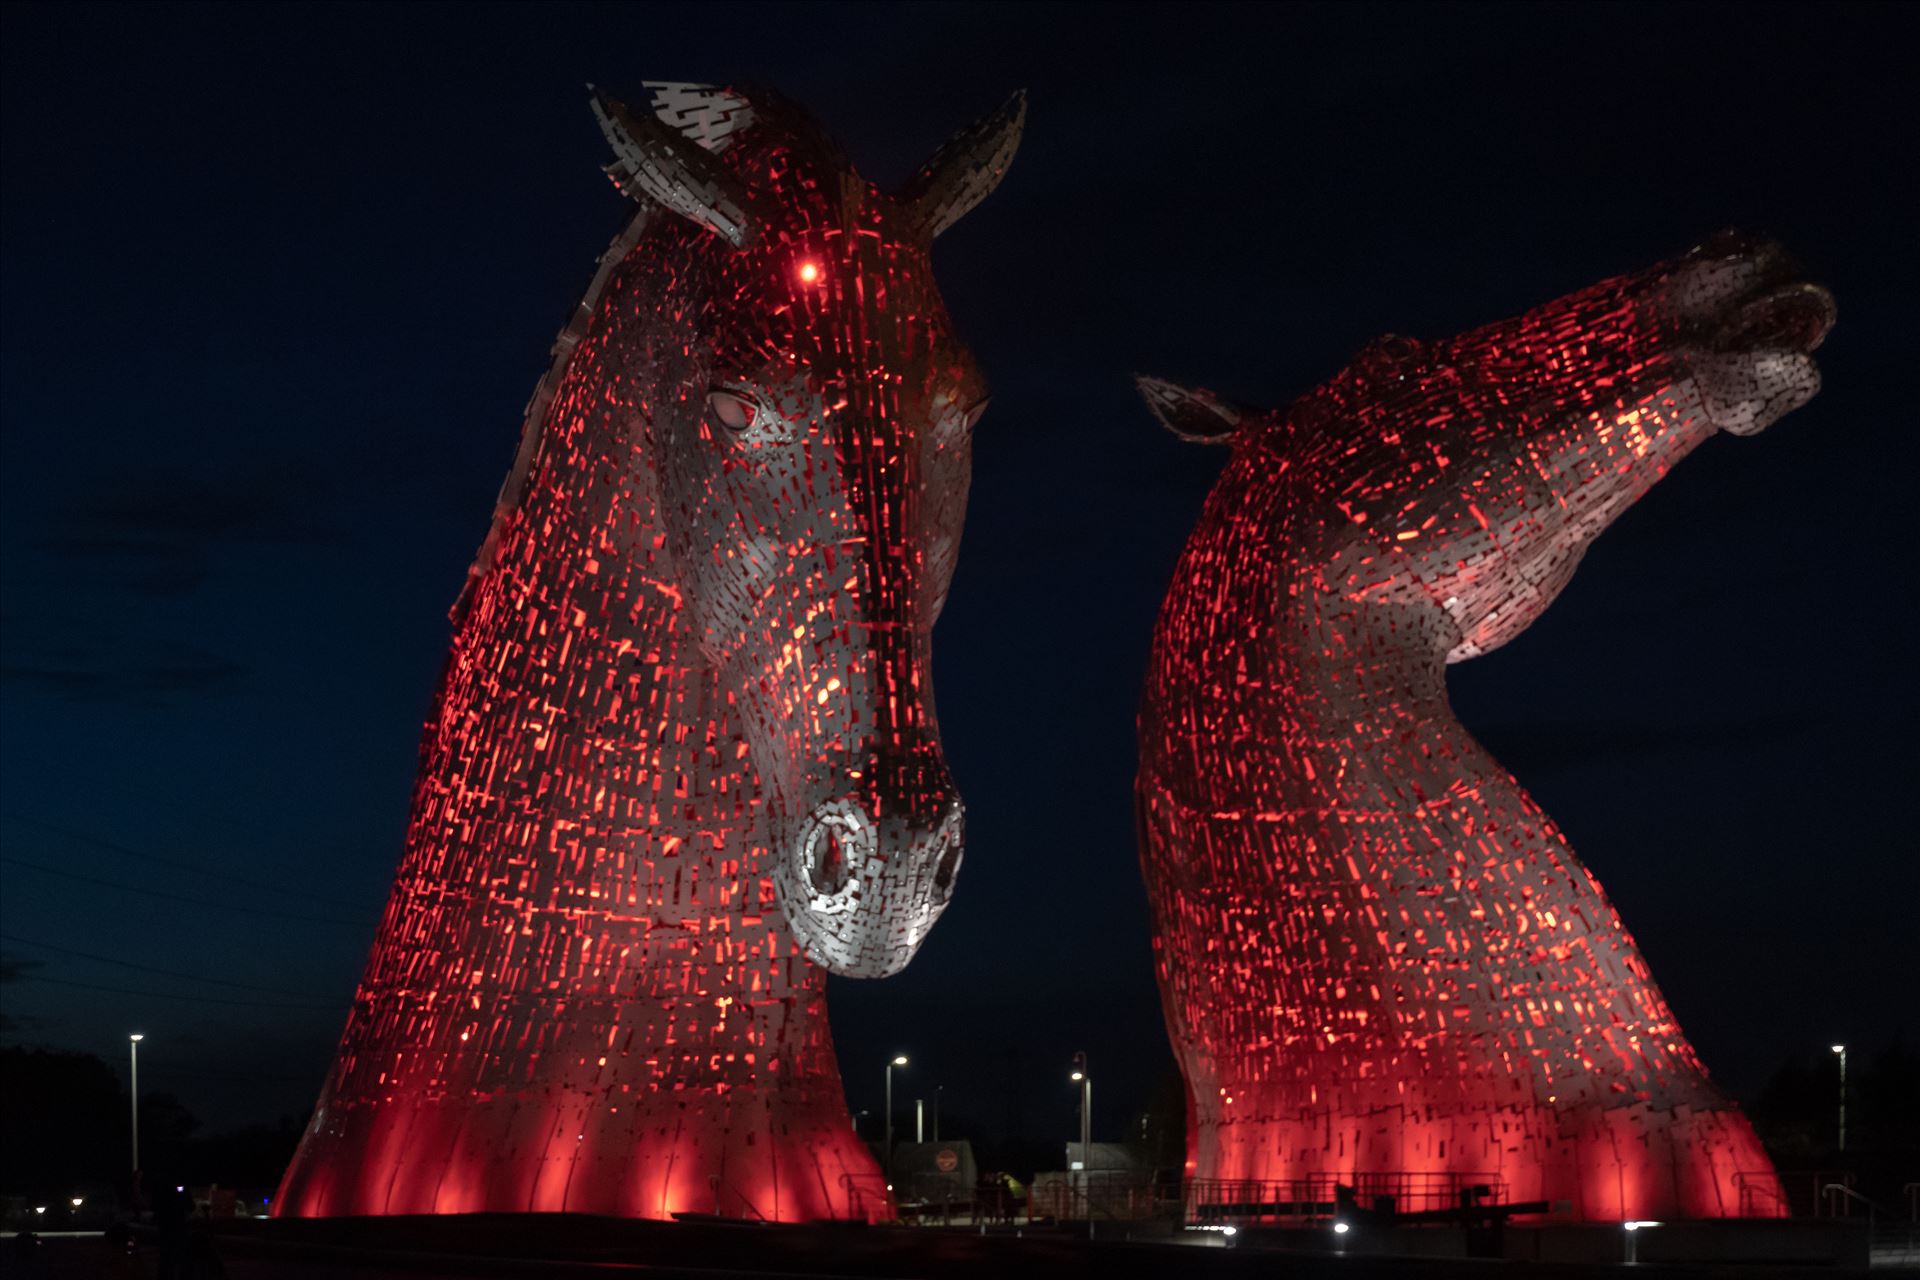 The Kelpies, Falkirk, Scotland - RedBuilt of structural steel with a stainless steel cladding, The Kelpies are 30 metres high and weigh 300 tonnes each. Construction began in June 2013